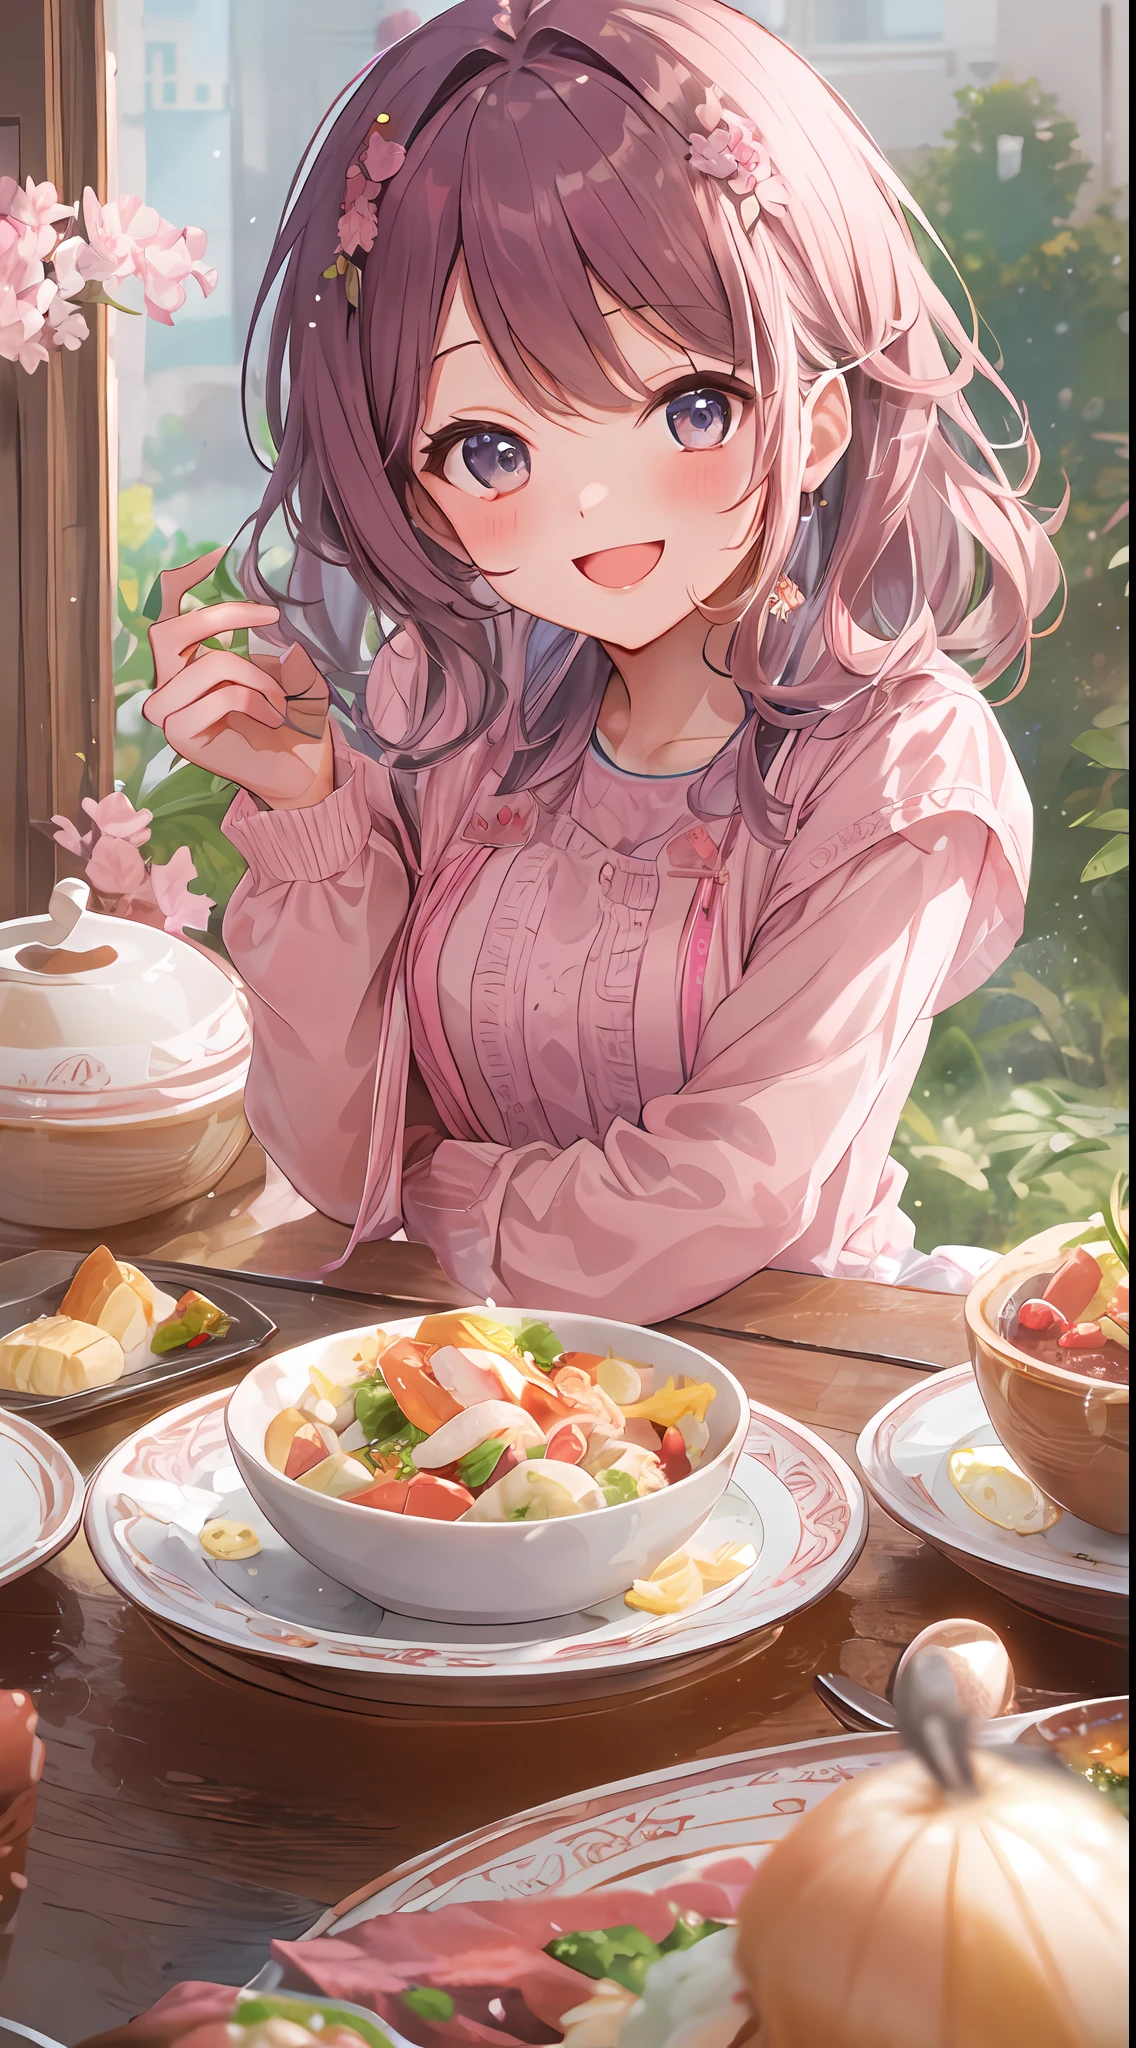 The image of a cute girl who likes pink, appearance々Eat a feast of dishes, With a smile and posing for the camera, With cute gestures.